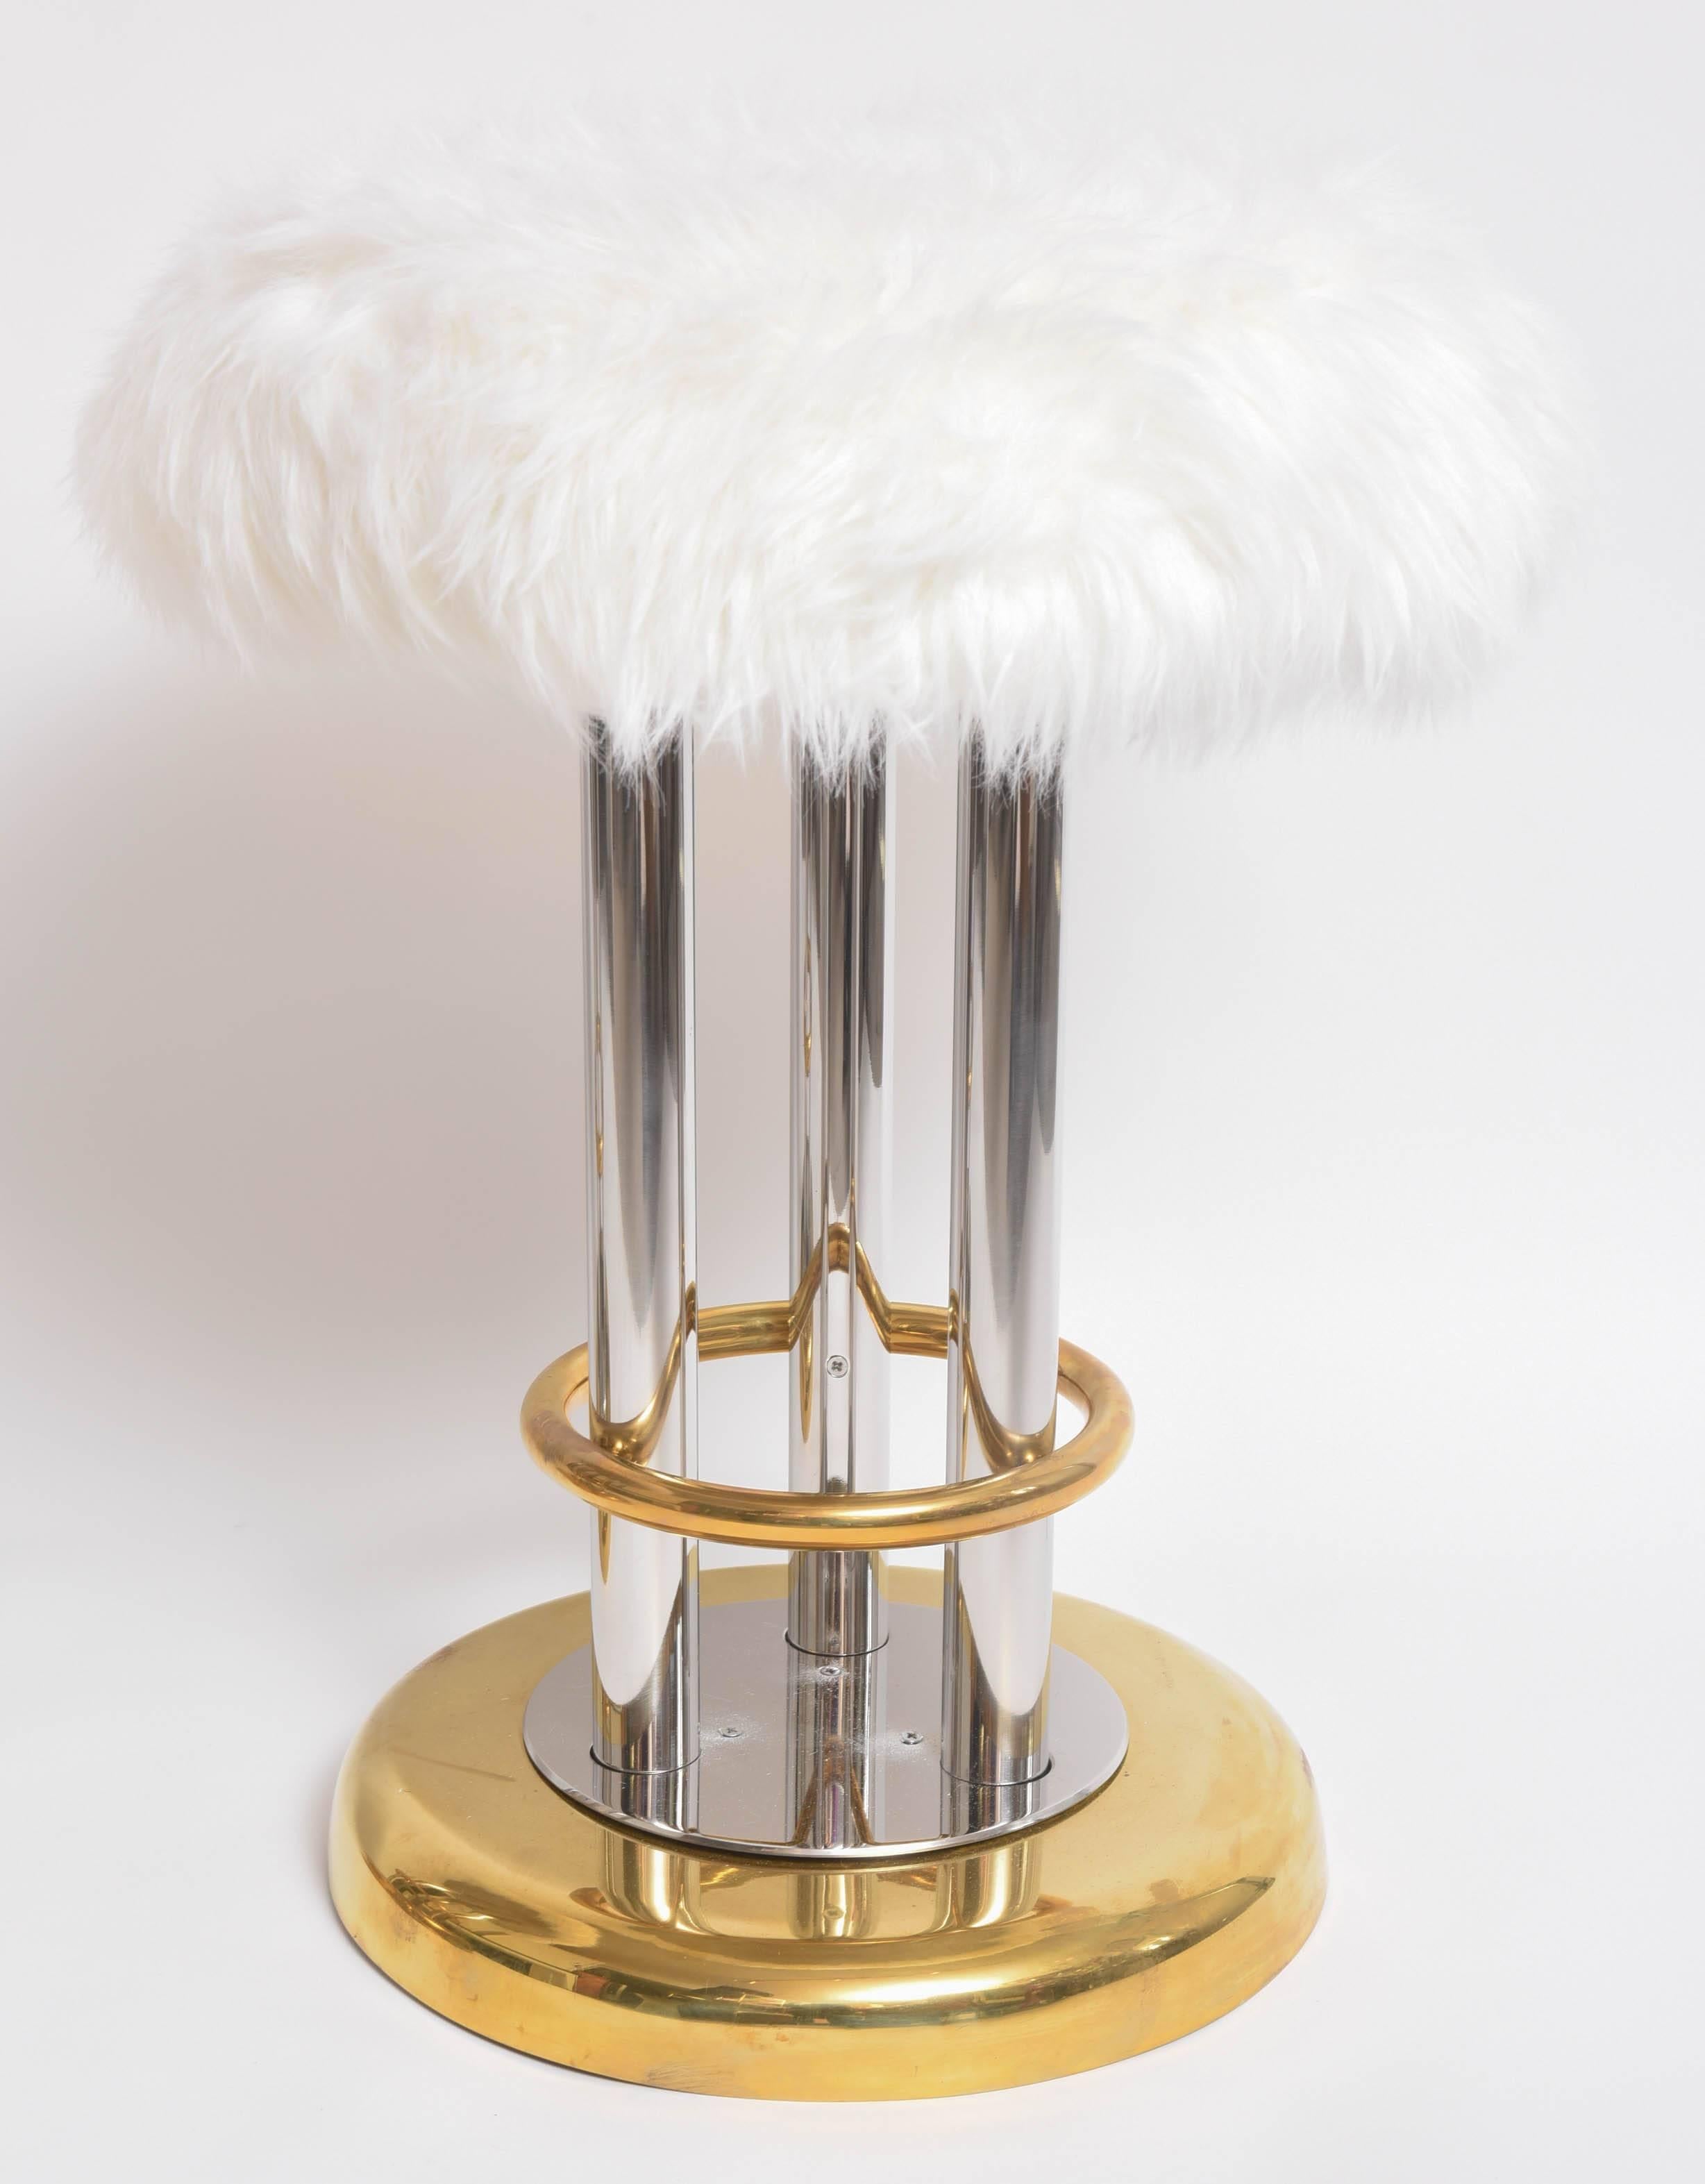 Mid-Century Modern American Decorative Brass or Chrome Furry Stools Pair  In Good Condition For Sale In Miami, FL